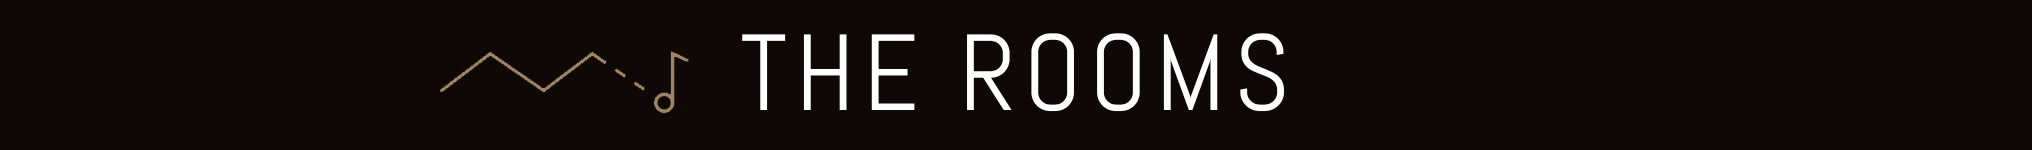 the rooms title logo